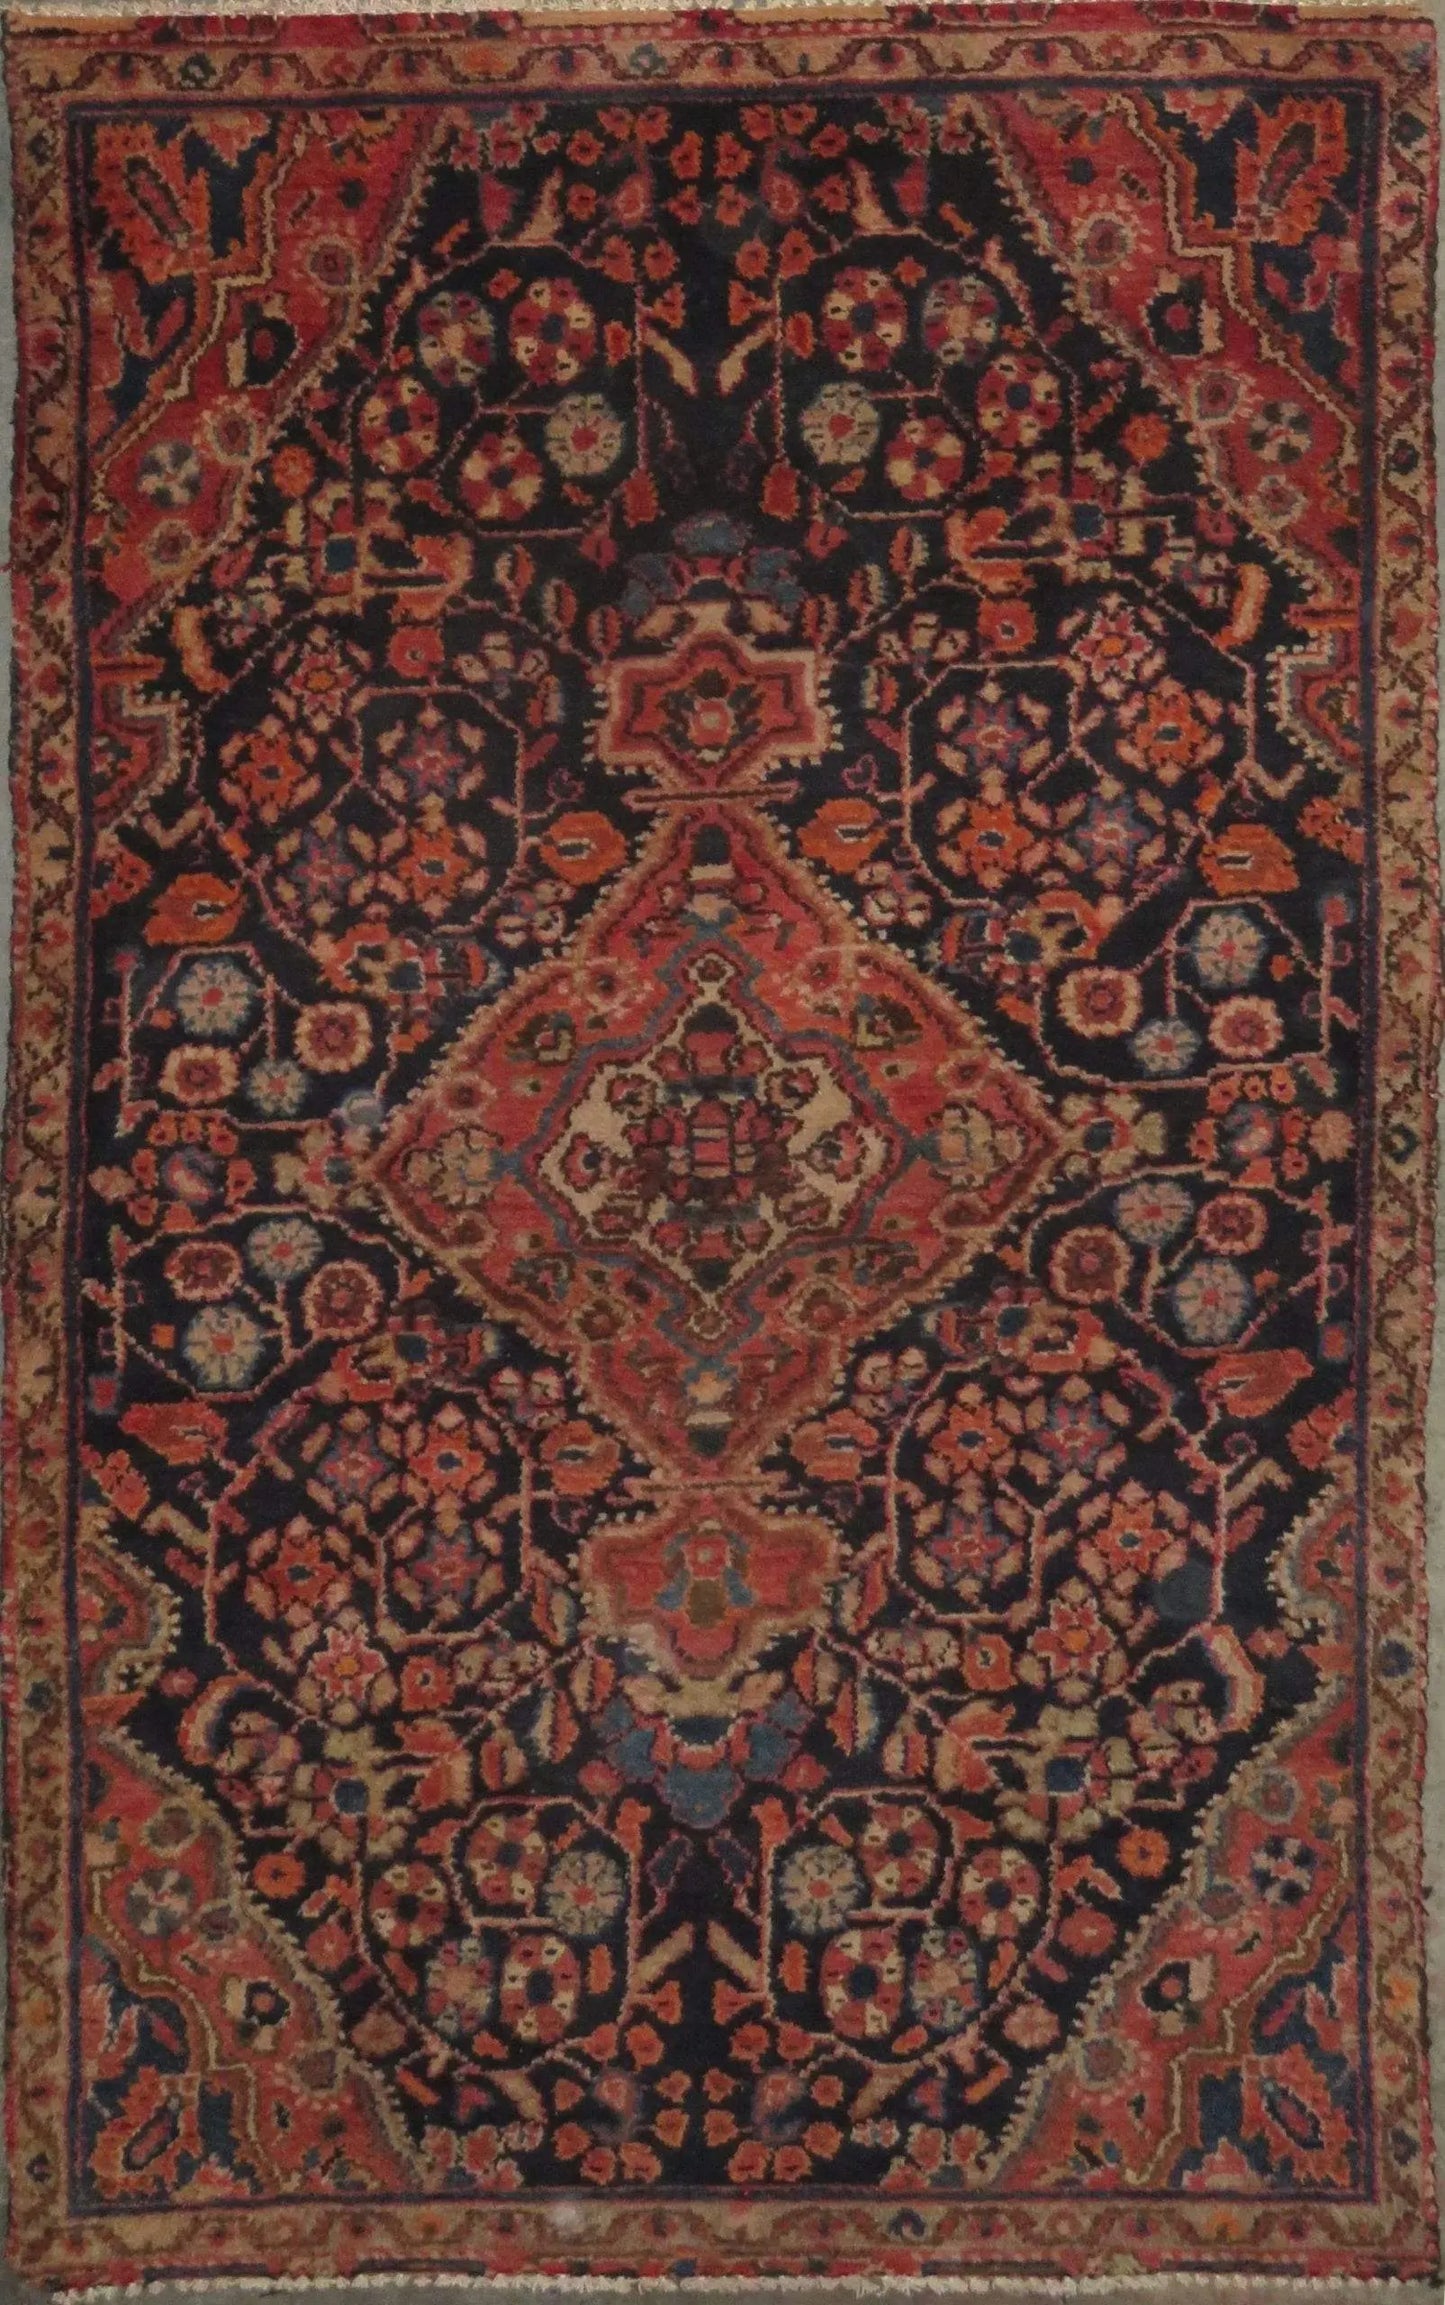 Hand-Knotted Persian Wool Rug _ Luxurious Vintage Design, 5'7" x 3'4", Artisan Crafted